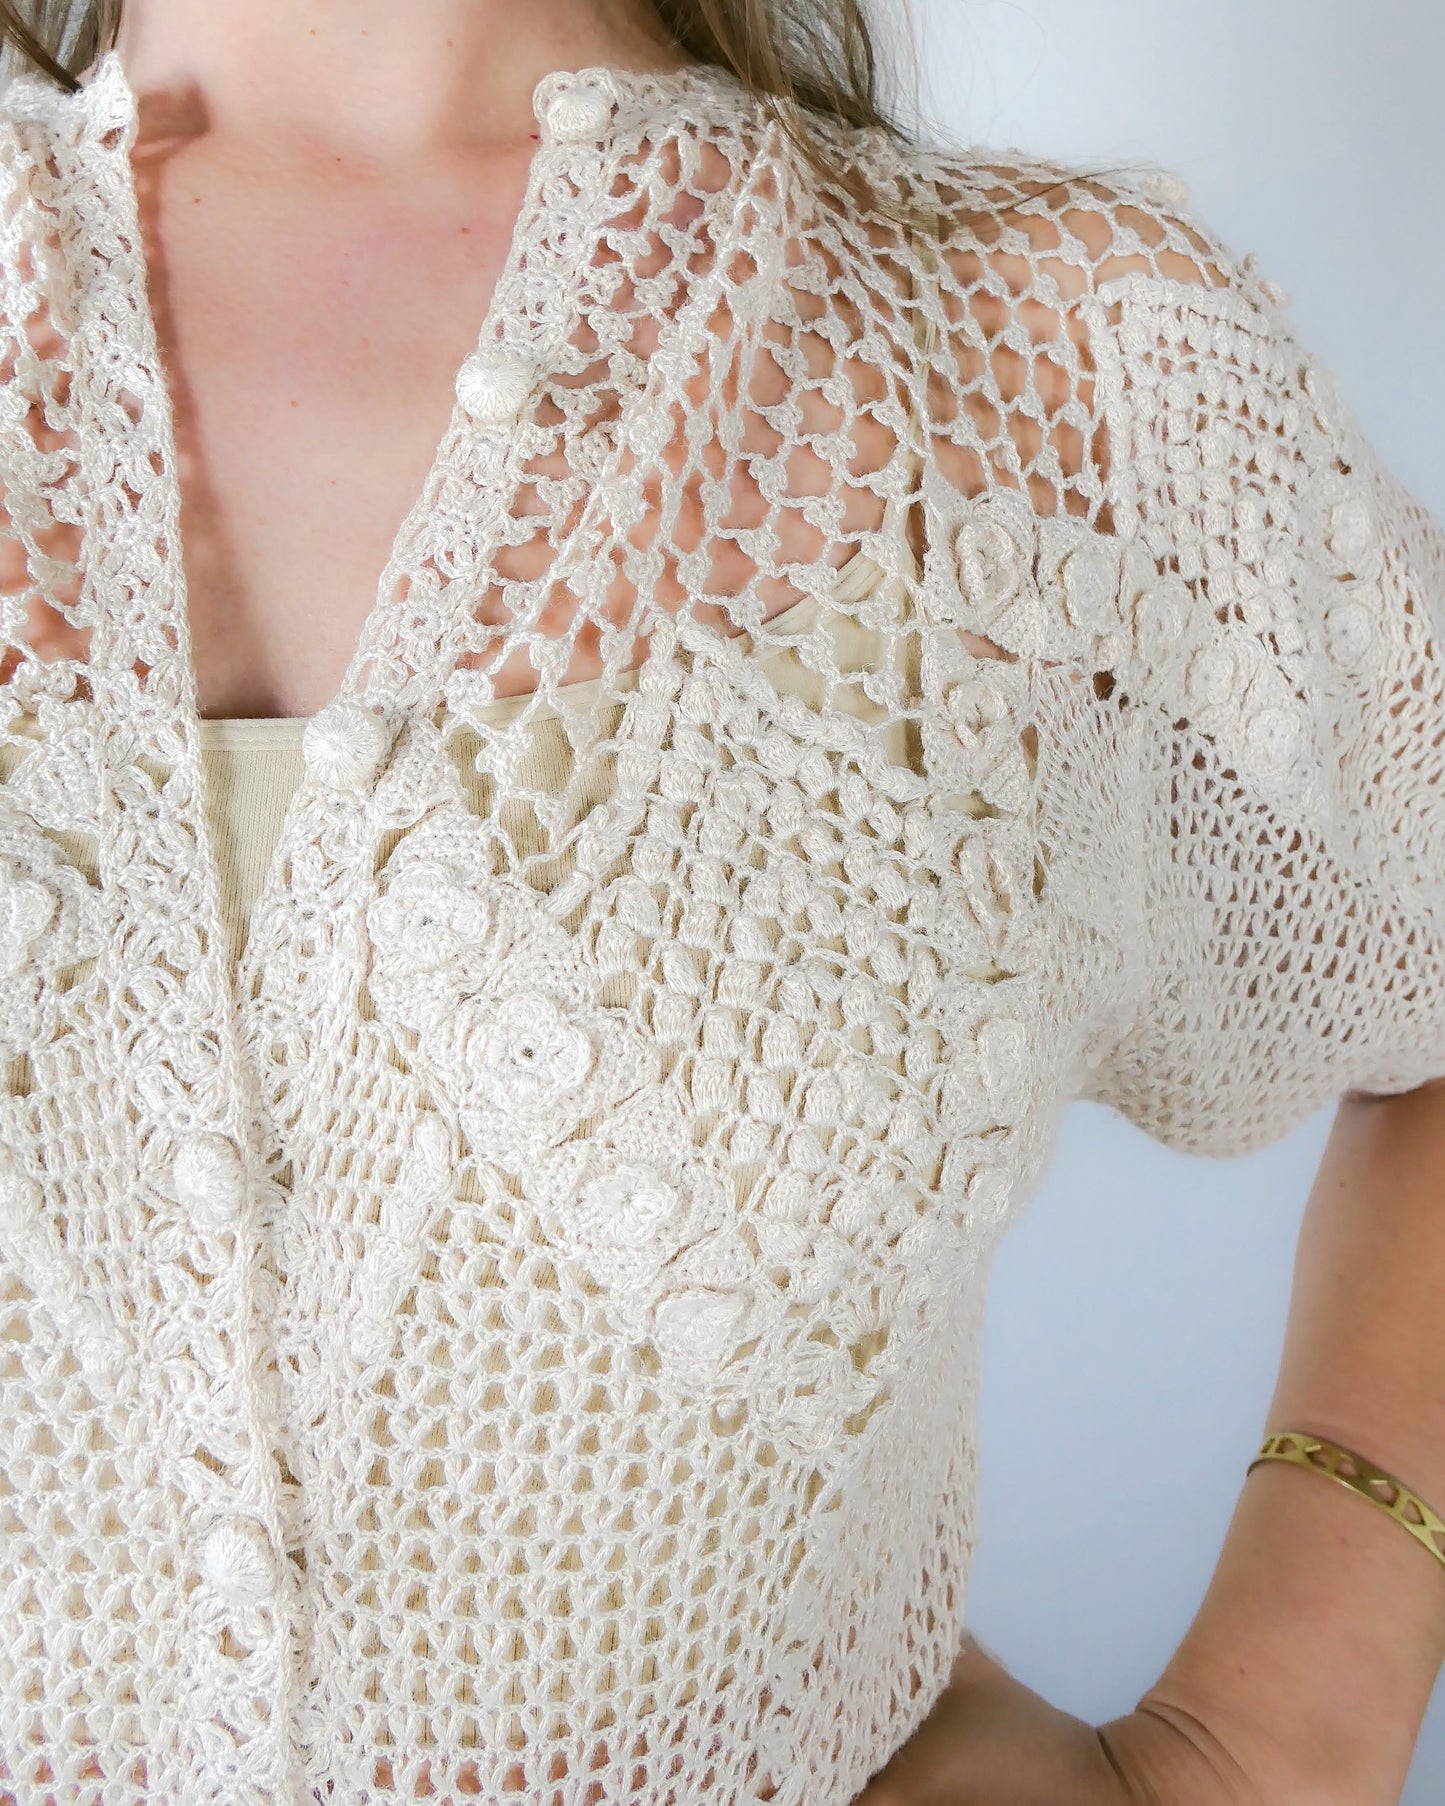 Closeup of collar. A classic Lim's Vintage hand crocheted button down top with a beautiful zig zag pattern on both the front and back, with lighter stitching around the chest and shoulders to bring a sense of lightness and space to the neckline. Petite flower buds sprout up from and accent the edges of the zig zag. This natural color top is versatile, comfortable, and adds a beautiful vintage accent to your wardrobe.